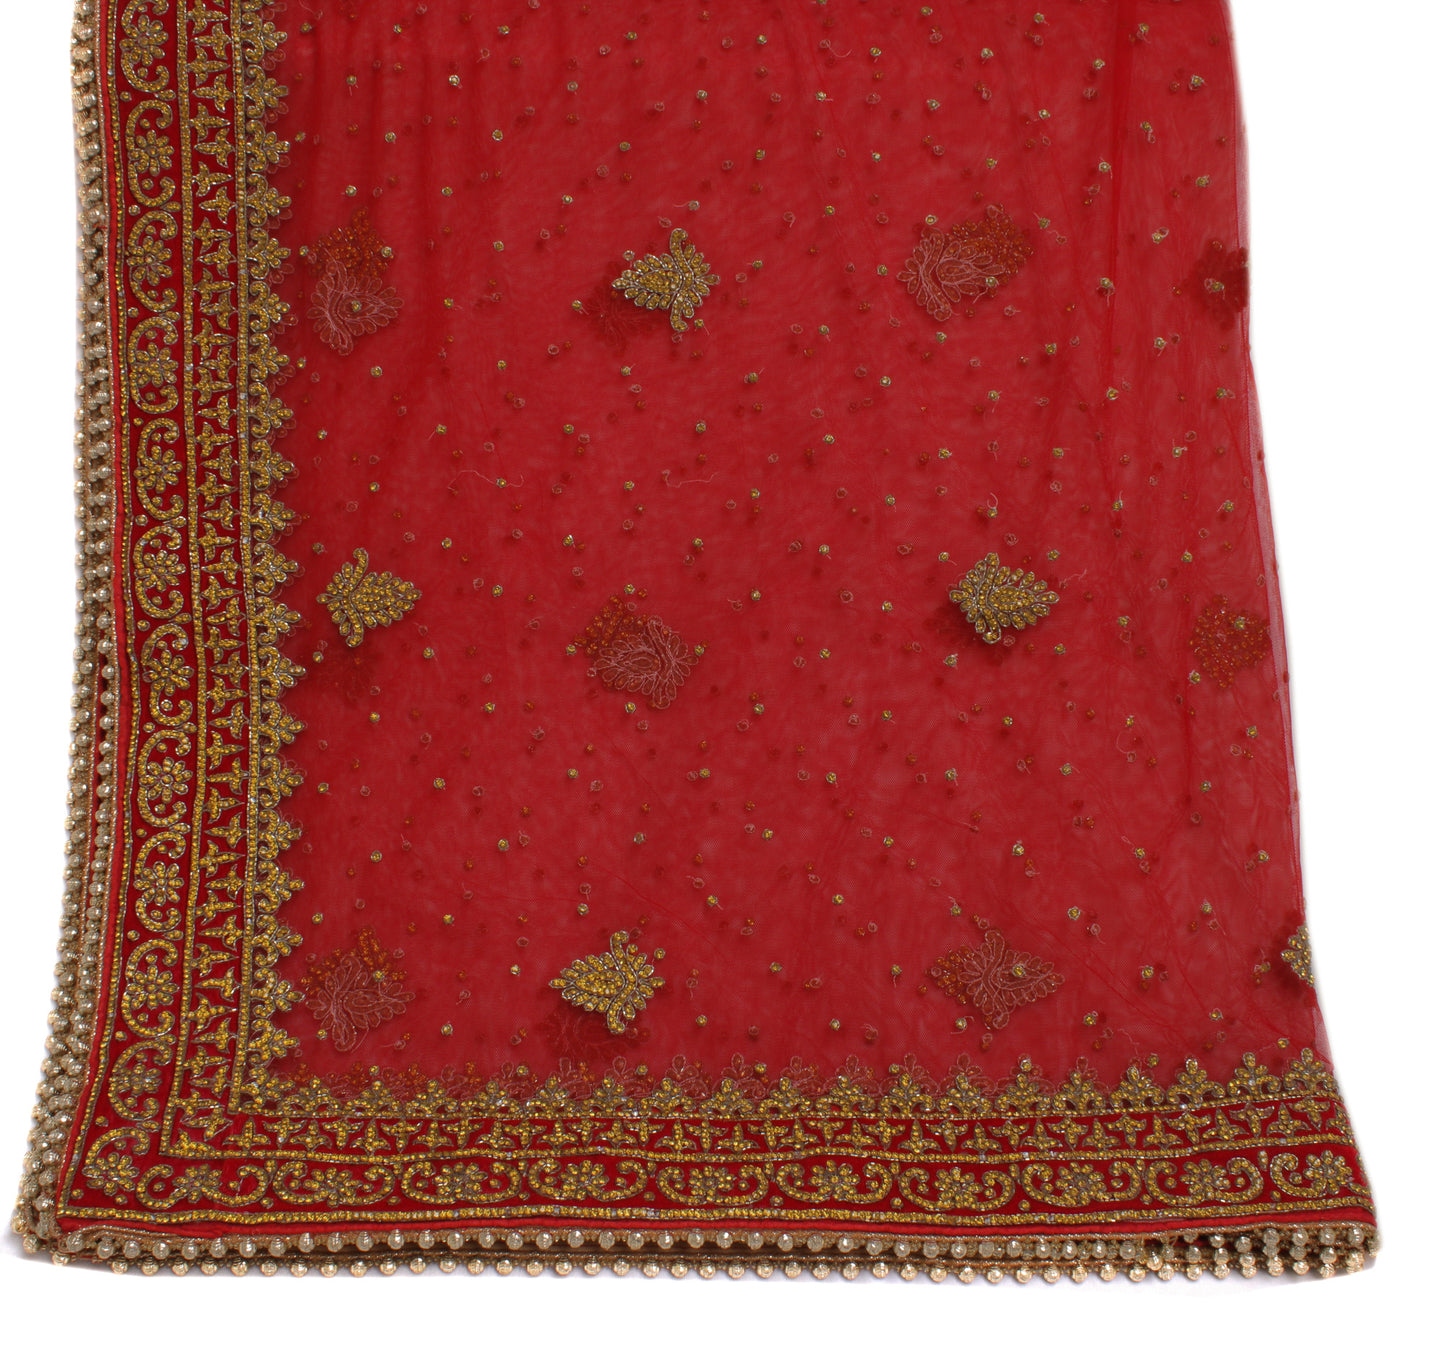 Sushila Vintage Red Indian Heavy Dupatta Net Mesh Embroidered Long Stole Scarves